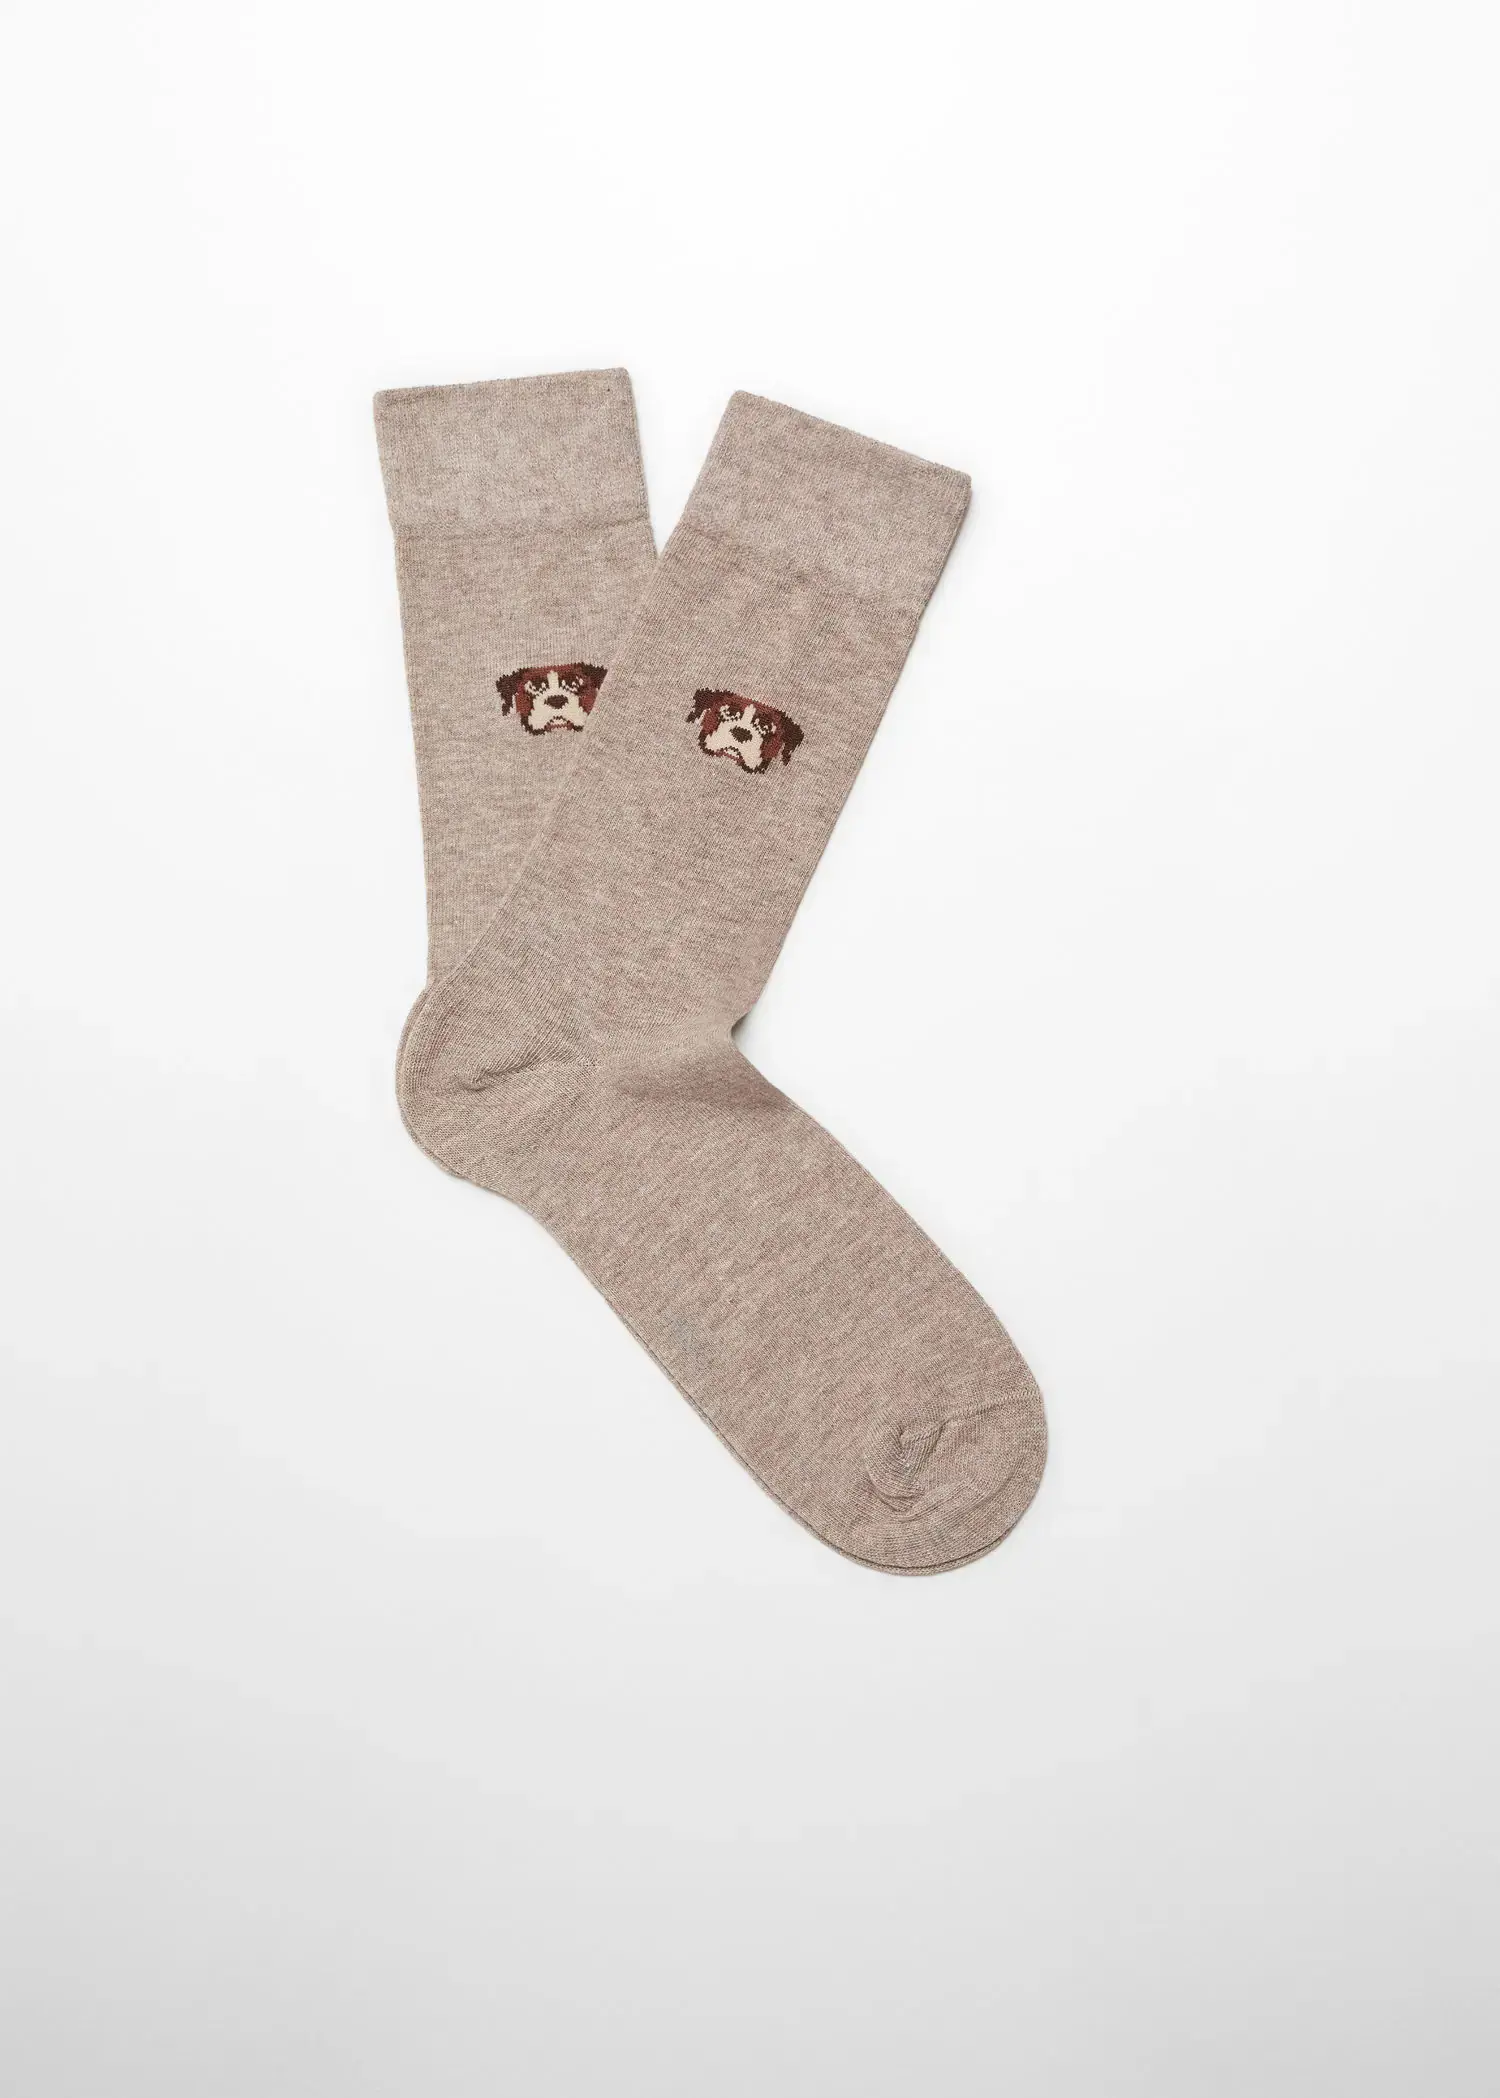 Mango Chaussettes coton broderie animal. 1